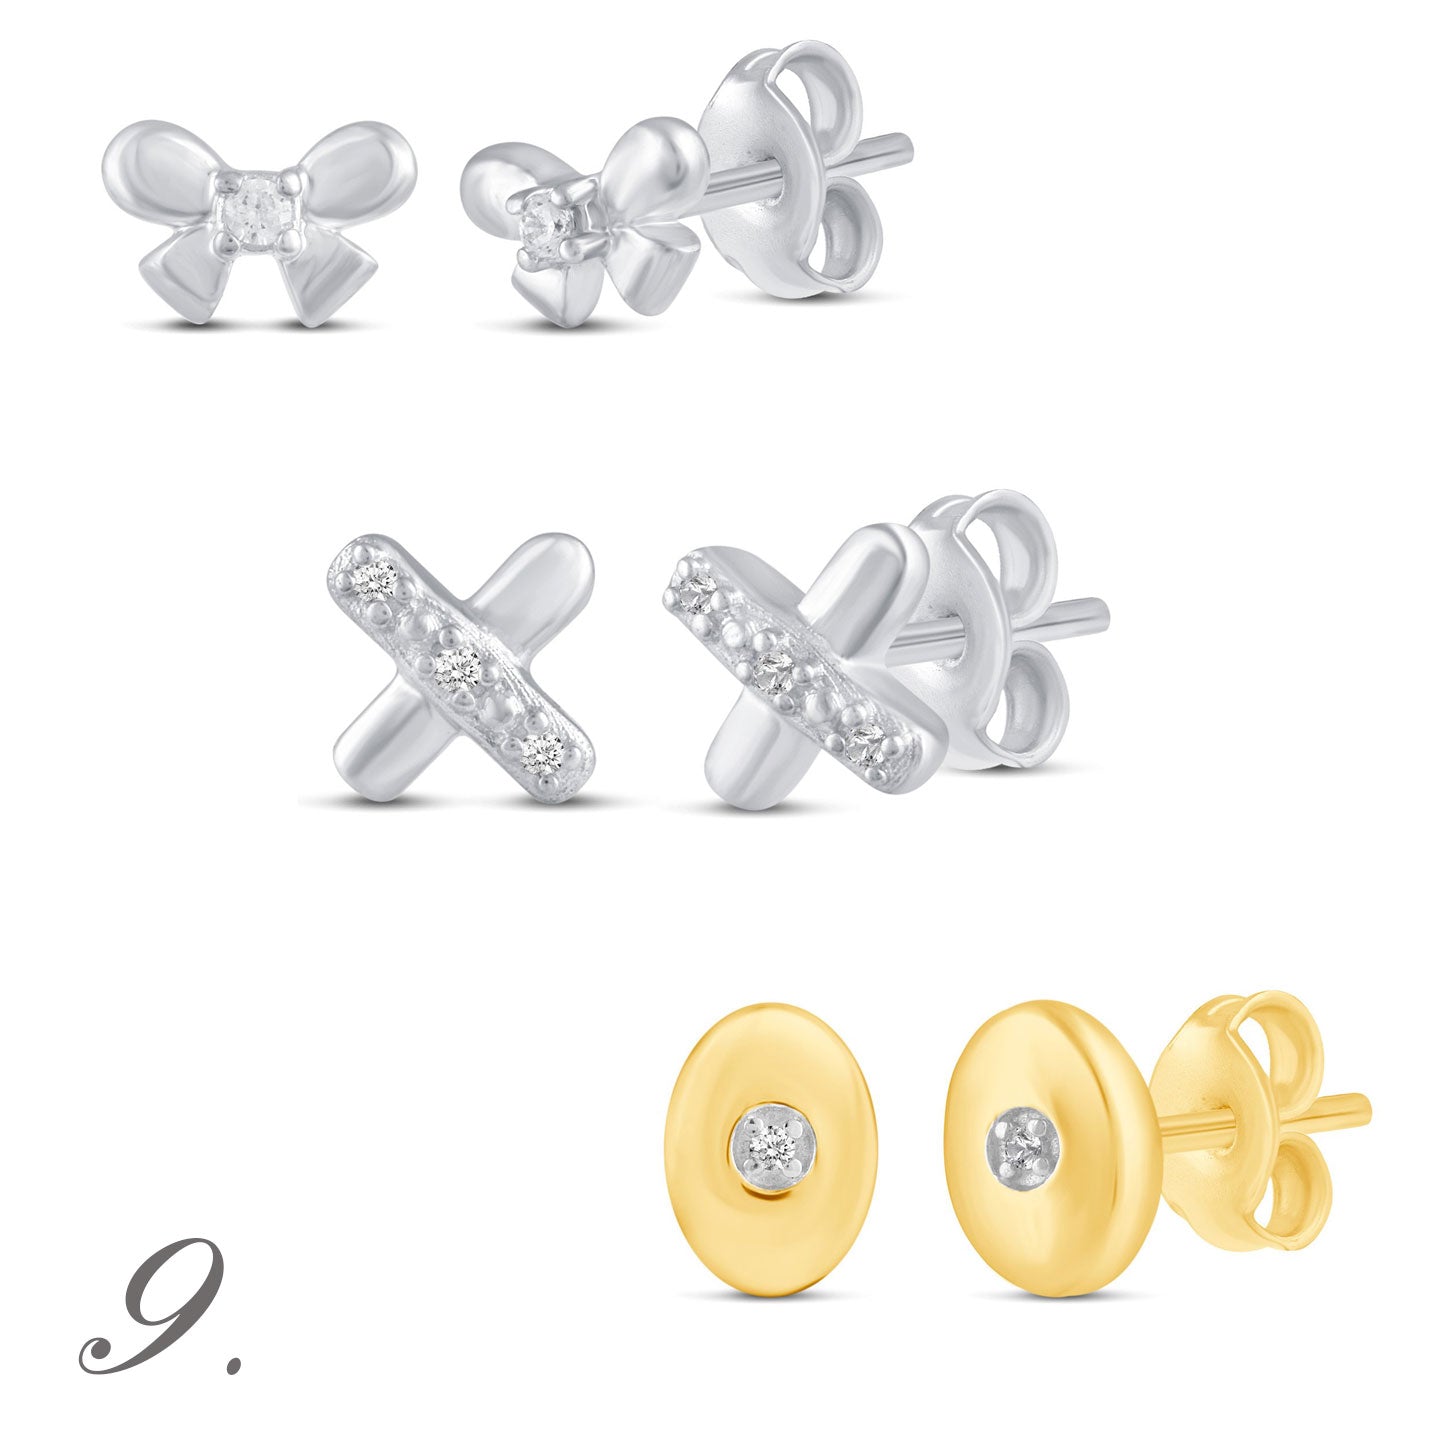 3 Pairs Set Ear Party 1/10 -1/20 Cttw Natural Diamond Earrings in 925 Sterling Silver ribbon bow xo yellowgold 